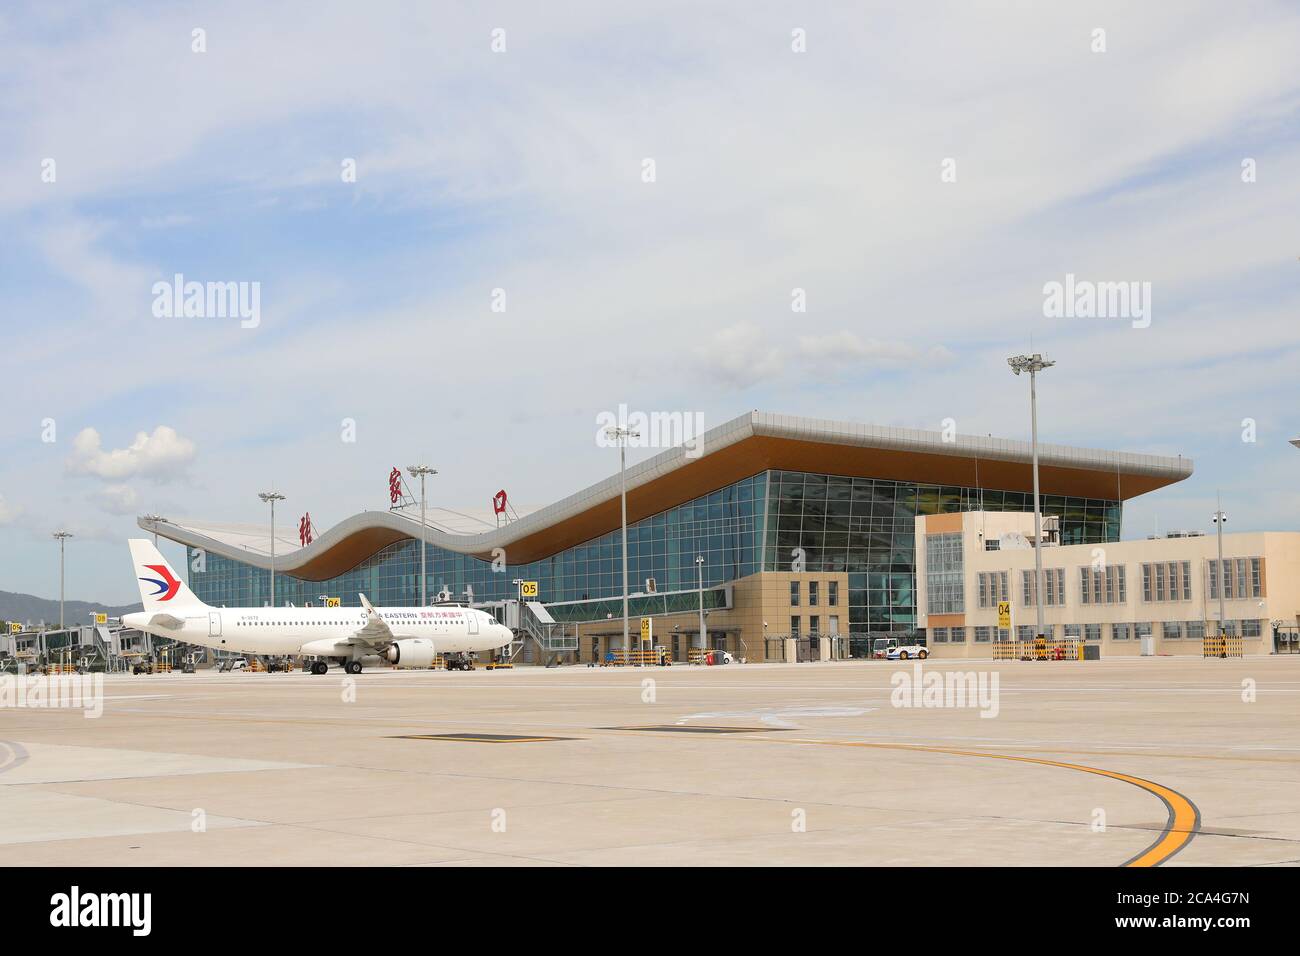 Zhangjiakou, China's Hebei Province. 4th Aug, 2020. A passenger plane is seen on the apron of the extended Zhangjiakou Ningyuan Airport in Zhangjiakou, north China's Hebei Province, Aug. 4, 2020. The extended Zhangjiakou Ningyuan Airport, one of the key supporting infrastructure developments for the 2022 Beijing Winter Olympics, was completed and put into service on Monday. The expansion project includes a new terminal, an emergency rescue center, an apron, and an extended runway, among others. Credit: Wu Diansen/Xinhua/Alamy Live News Stock Photo